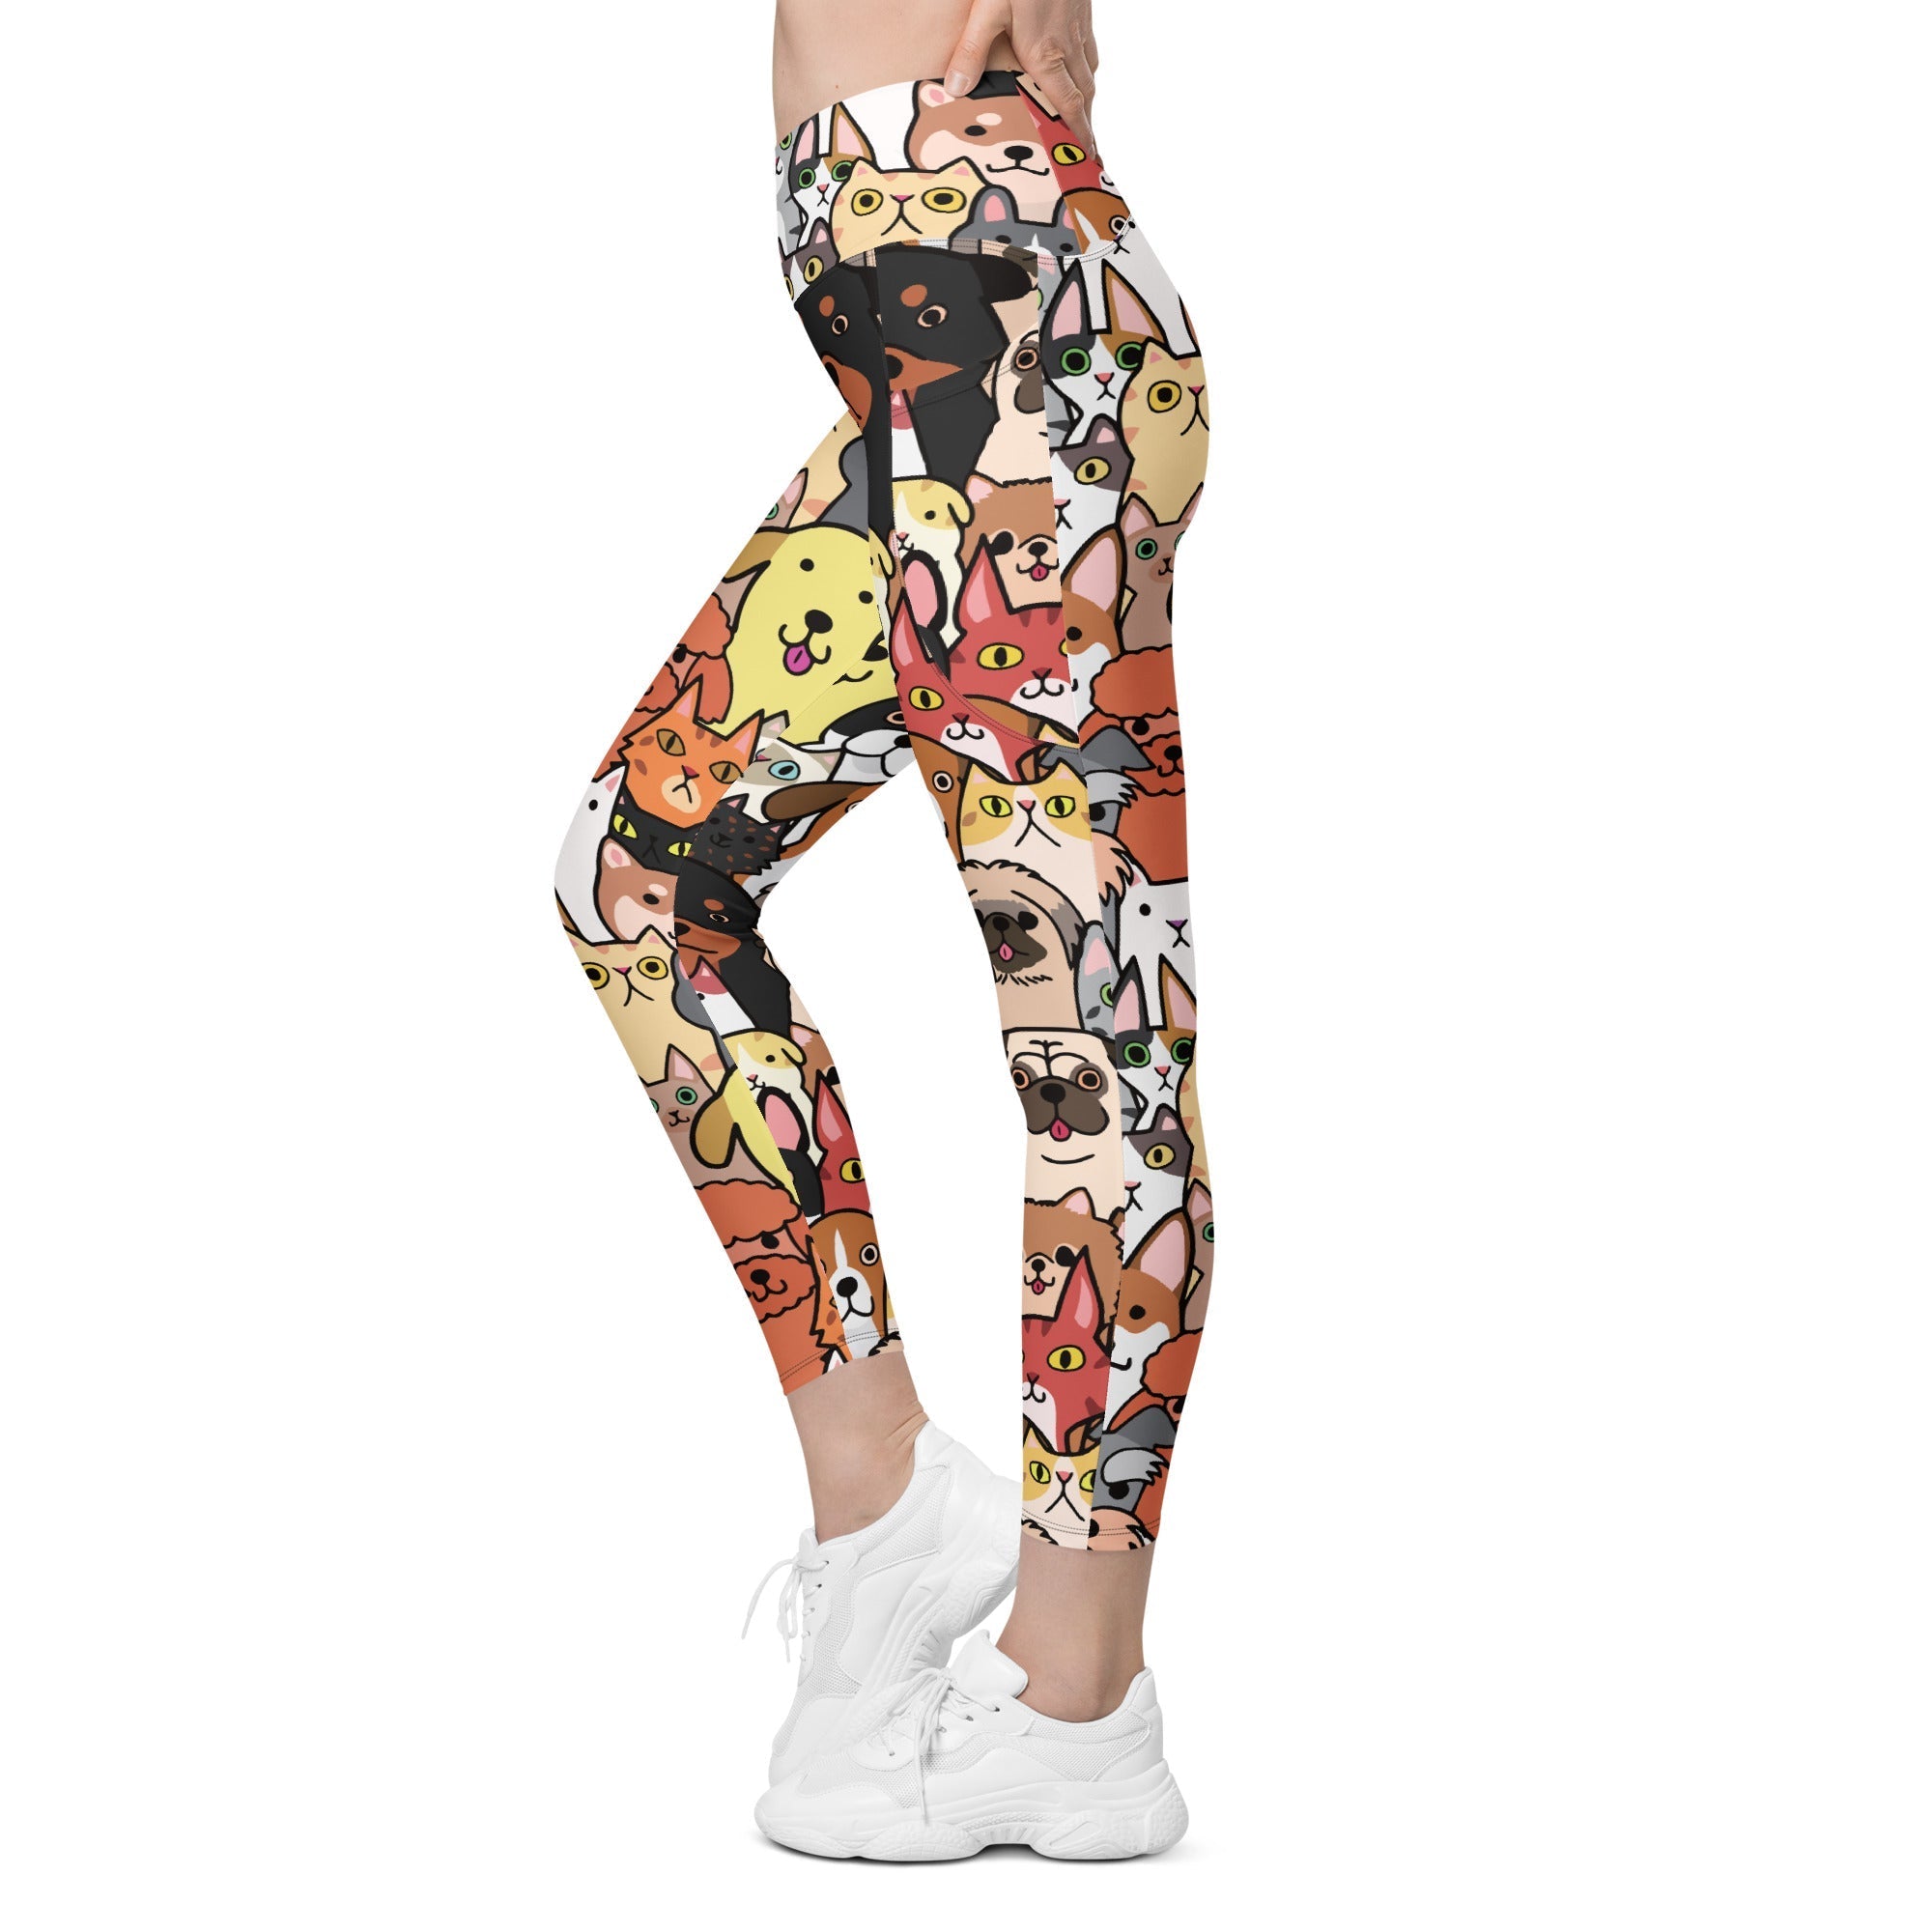 Cuteness Overload Crossover Leggings With Pockets